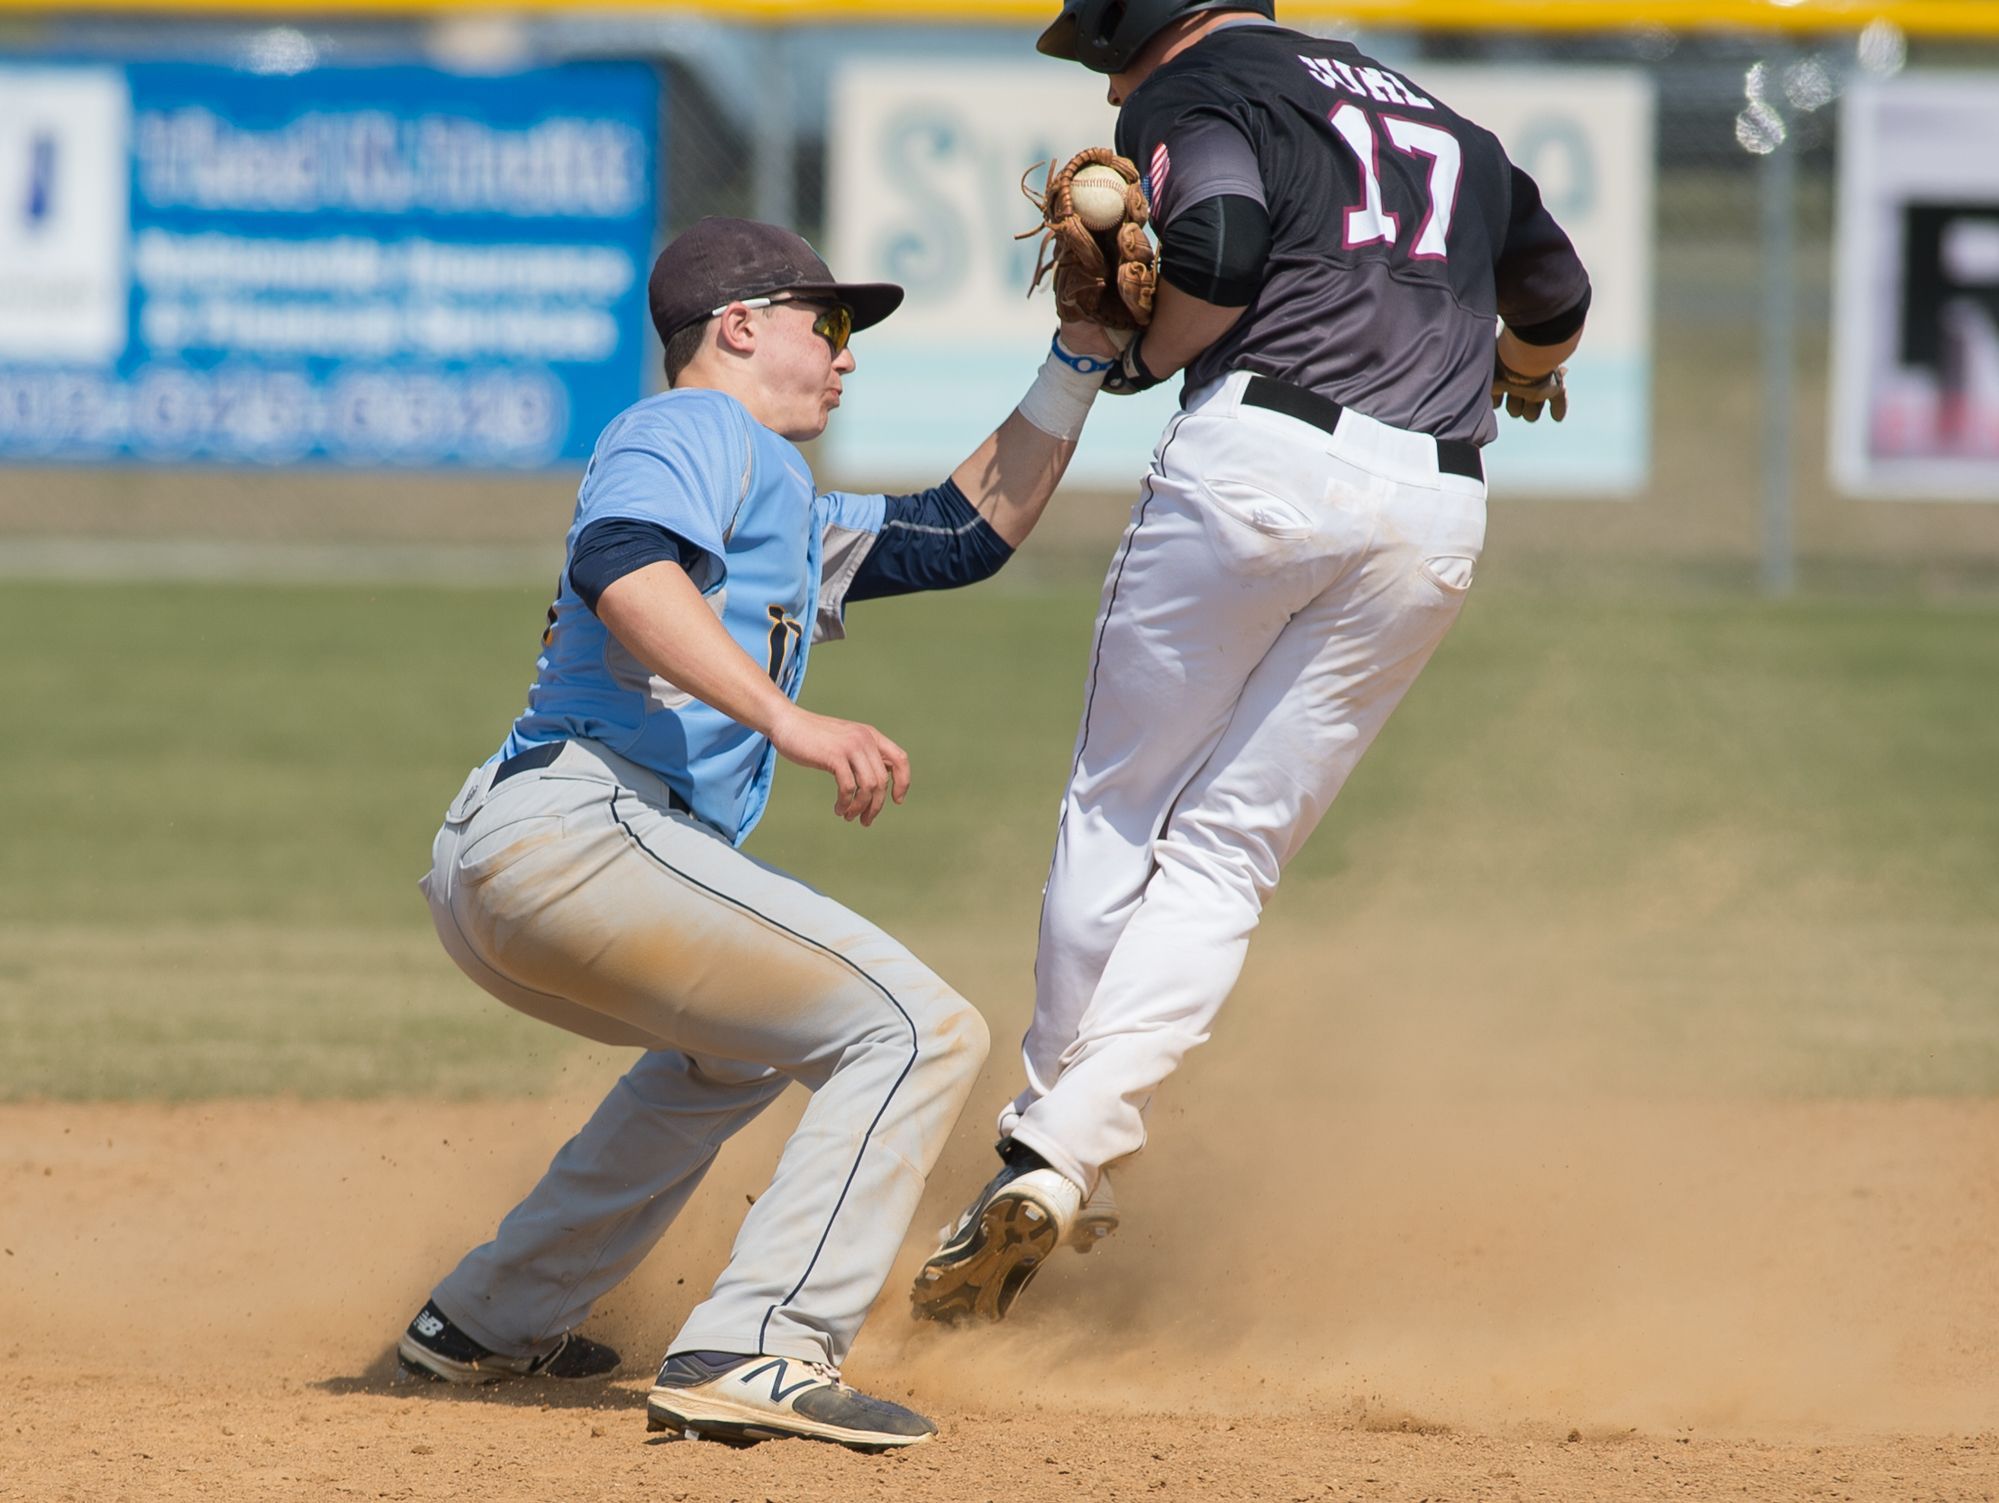 Caravel’s Tyler Juhl (17) is tagged by Cape Henlopen’s Zachary Gelof (11) after reaching second base safely in their 11-10 win over Cape Henlopen.